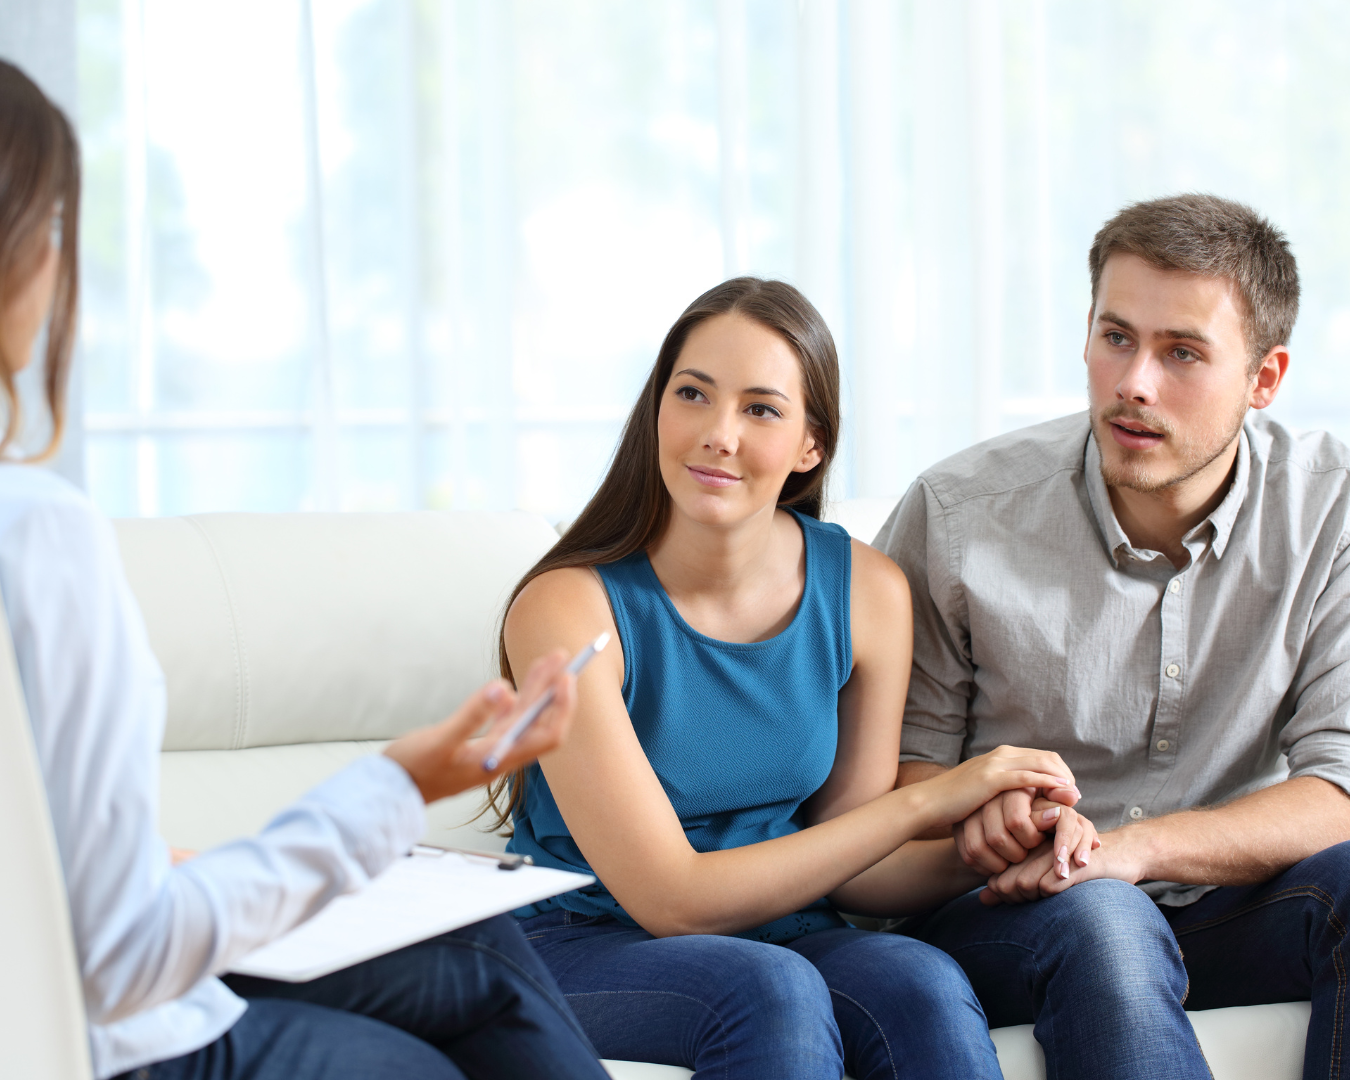 Male/Female couple sitting on a couch, female is wearing a blue tank top and jeans, male is wearing a grey button up long sleeve shirt and jeans, they are holding hands, talking with a female sitting in a chair wearing a white long sleeve shirt holding a pen and notepad.